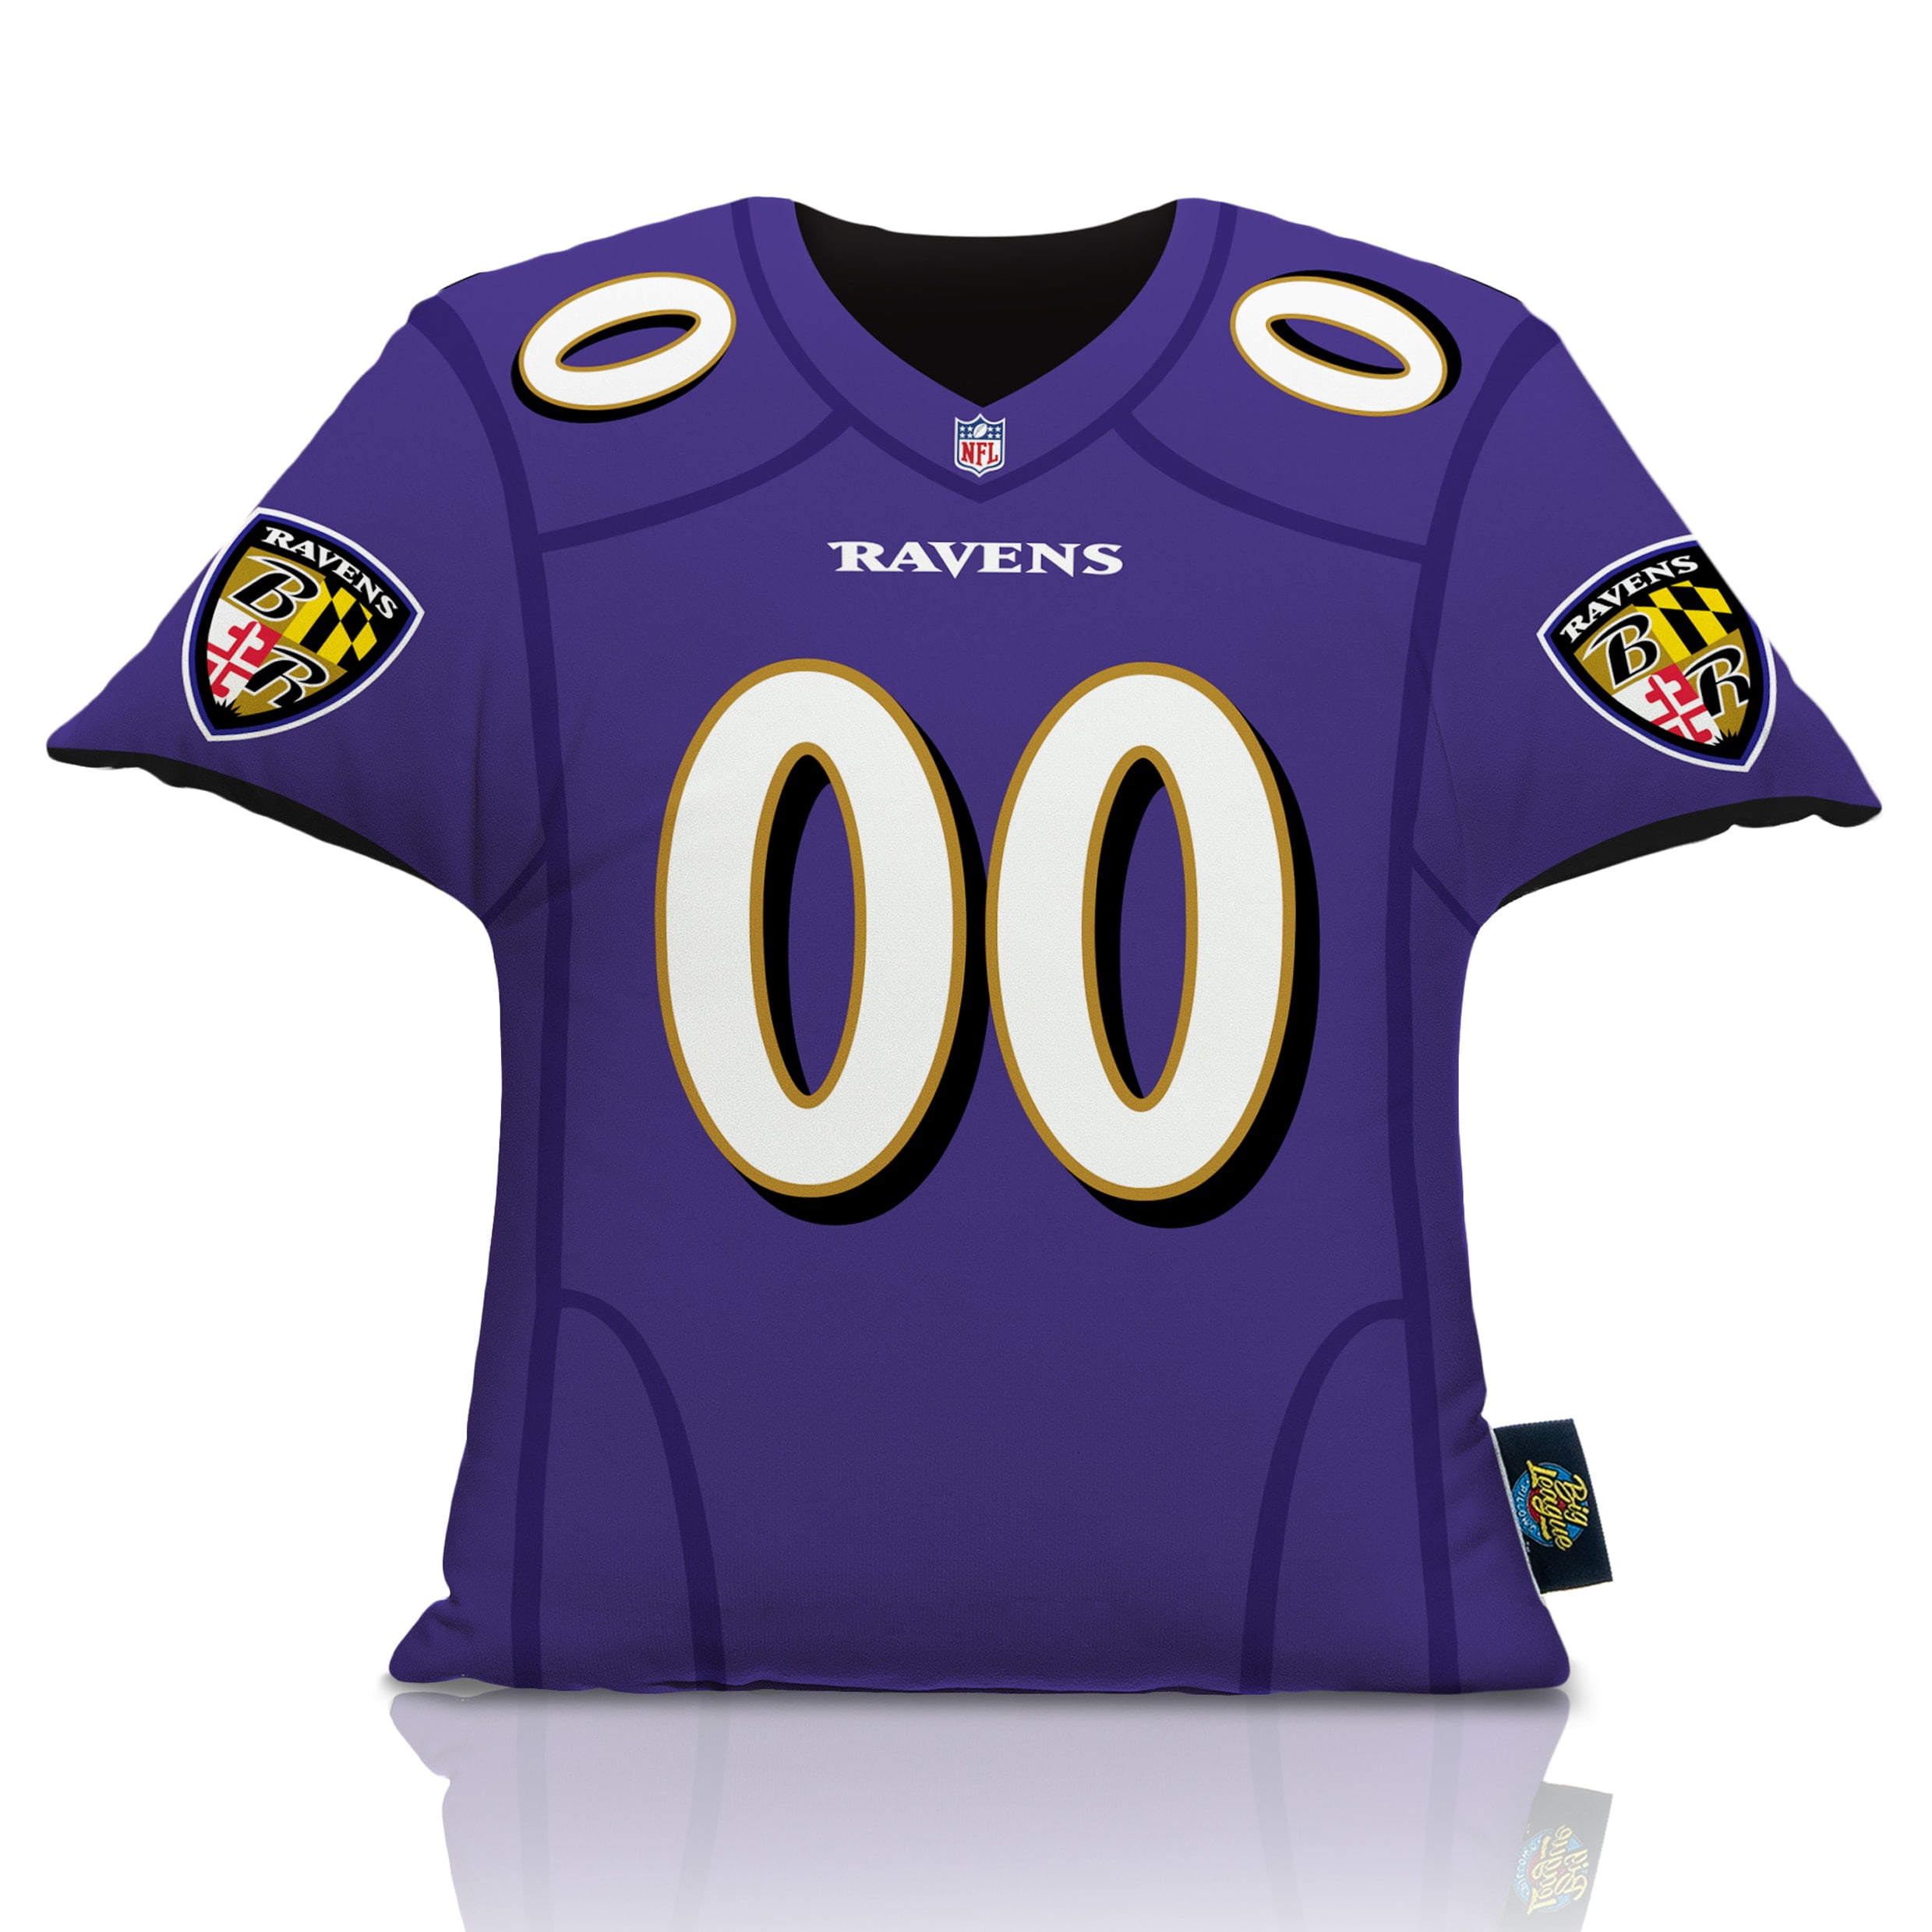 where can i buy a baltimore ravens jersey